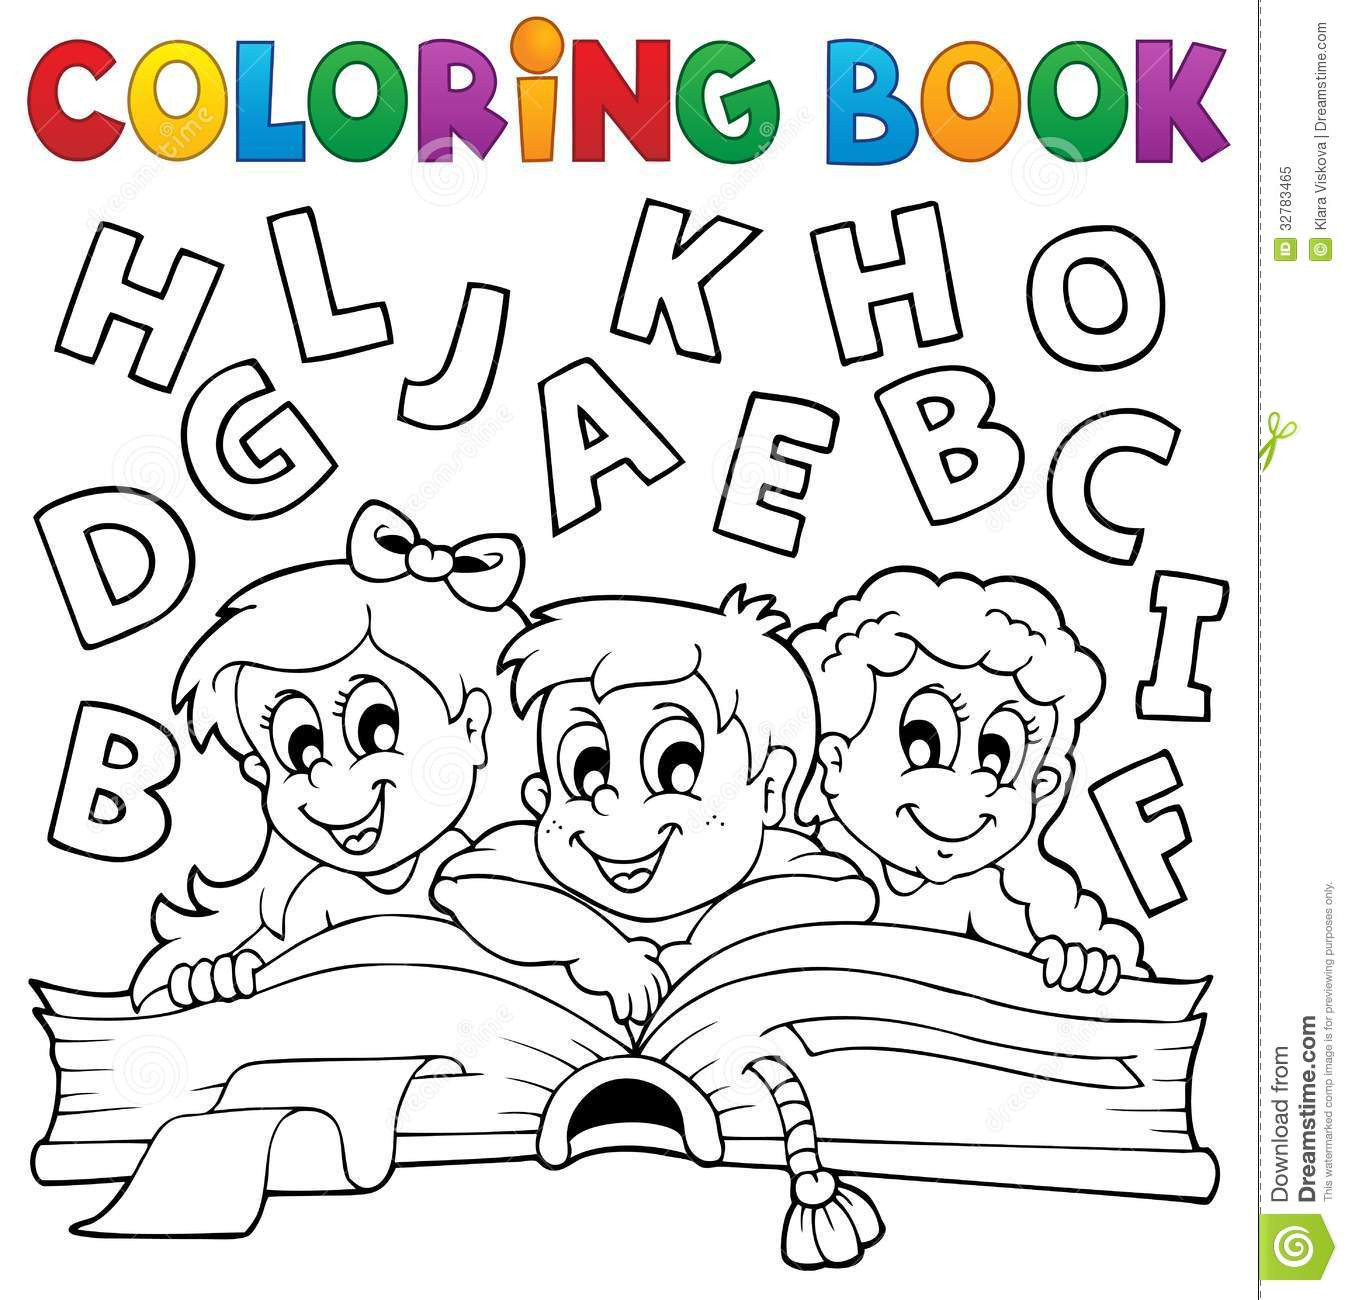 Coloring Book Kids
 Coloring book kids theme 5 stock vector Image of clipart